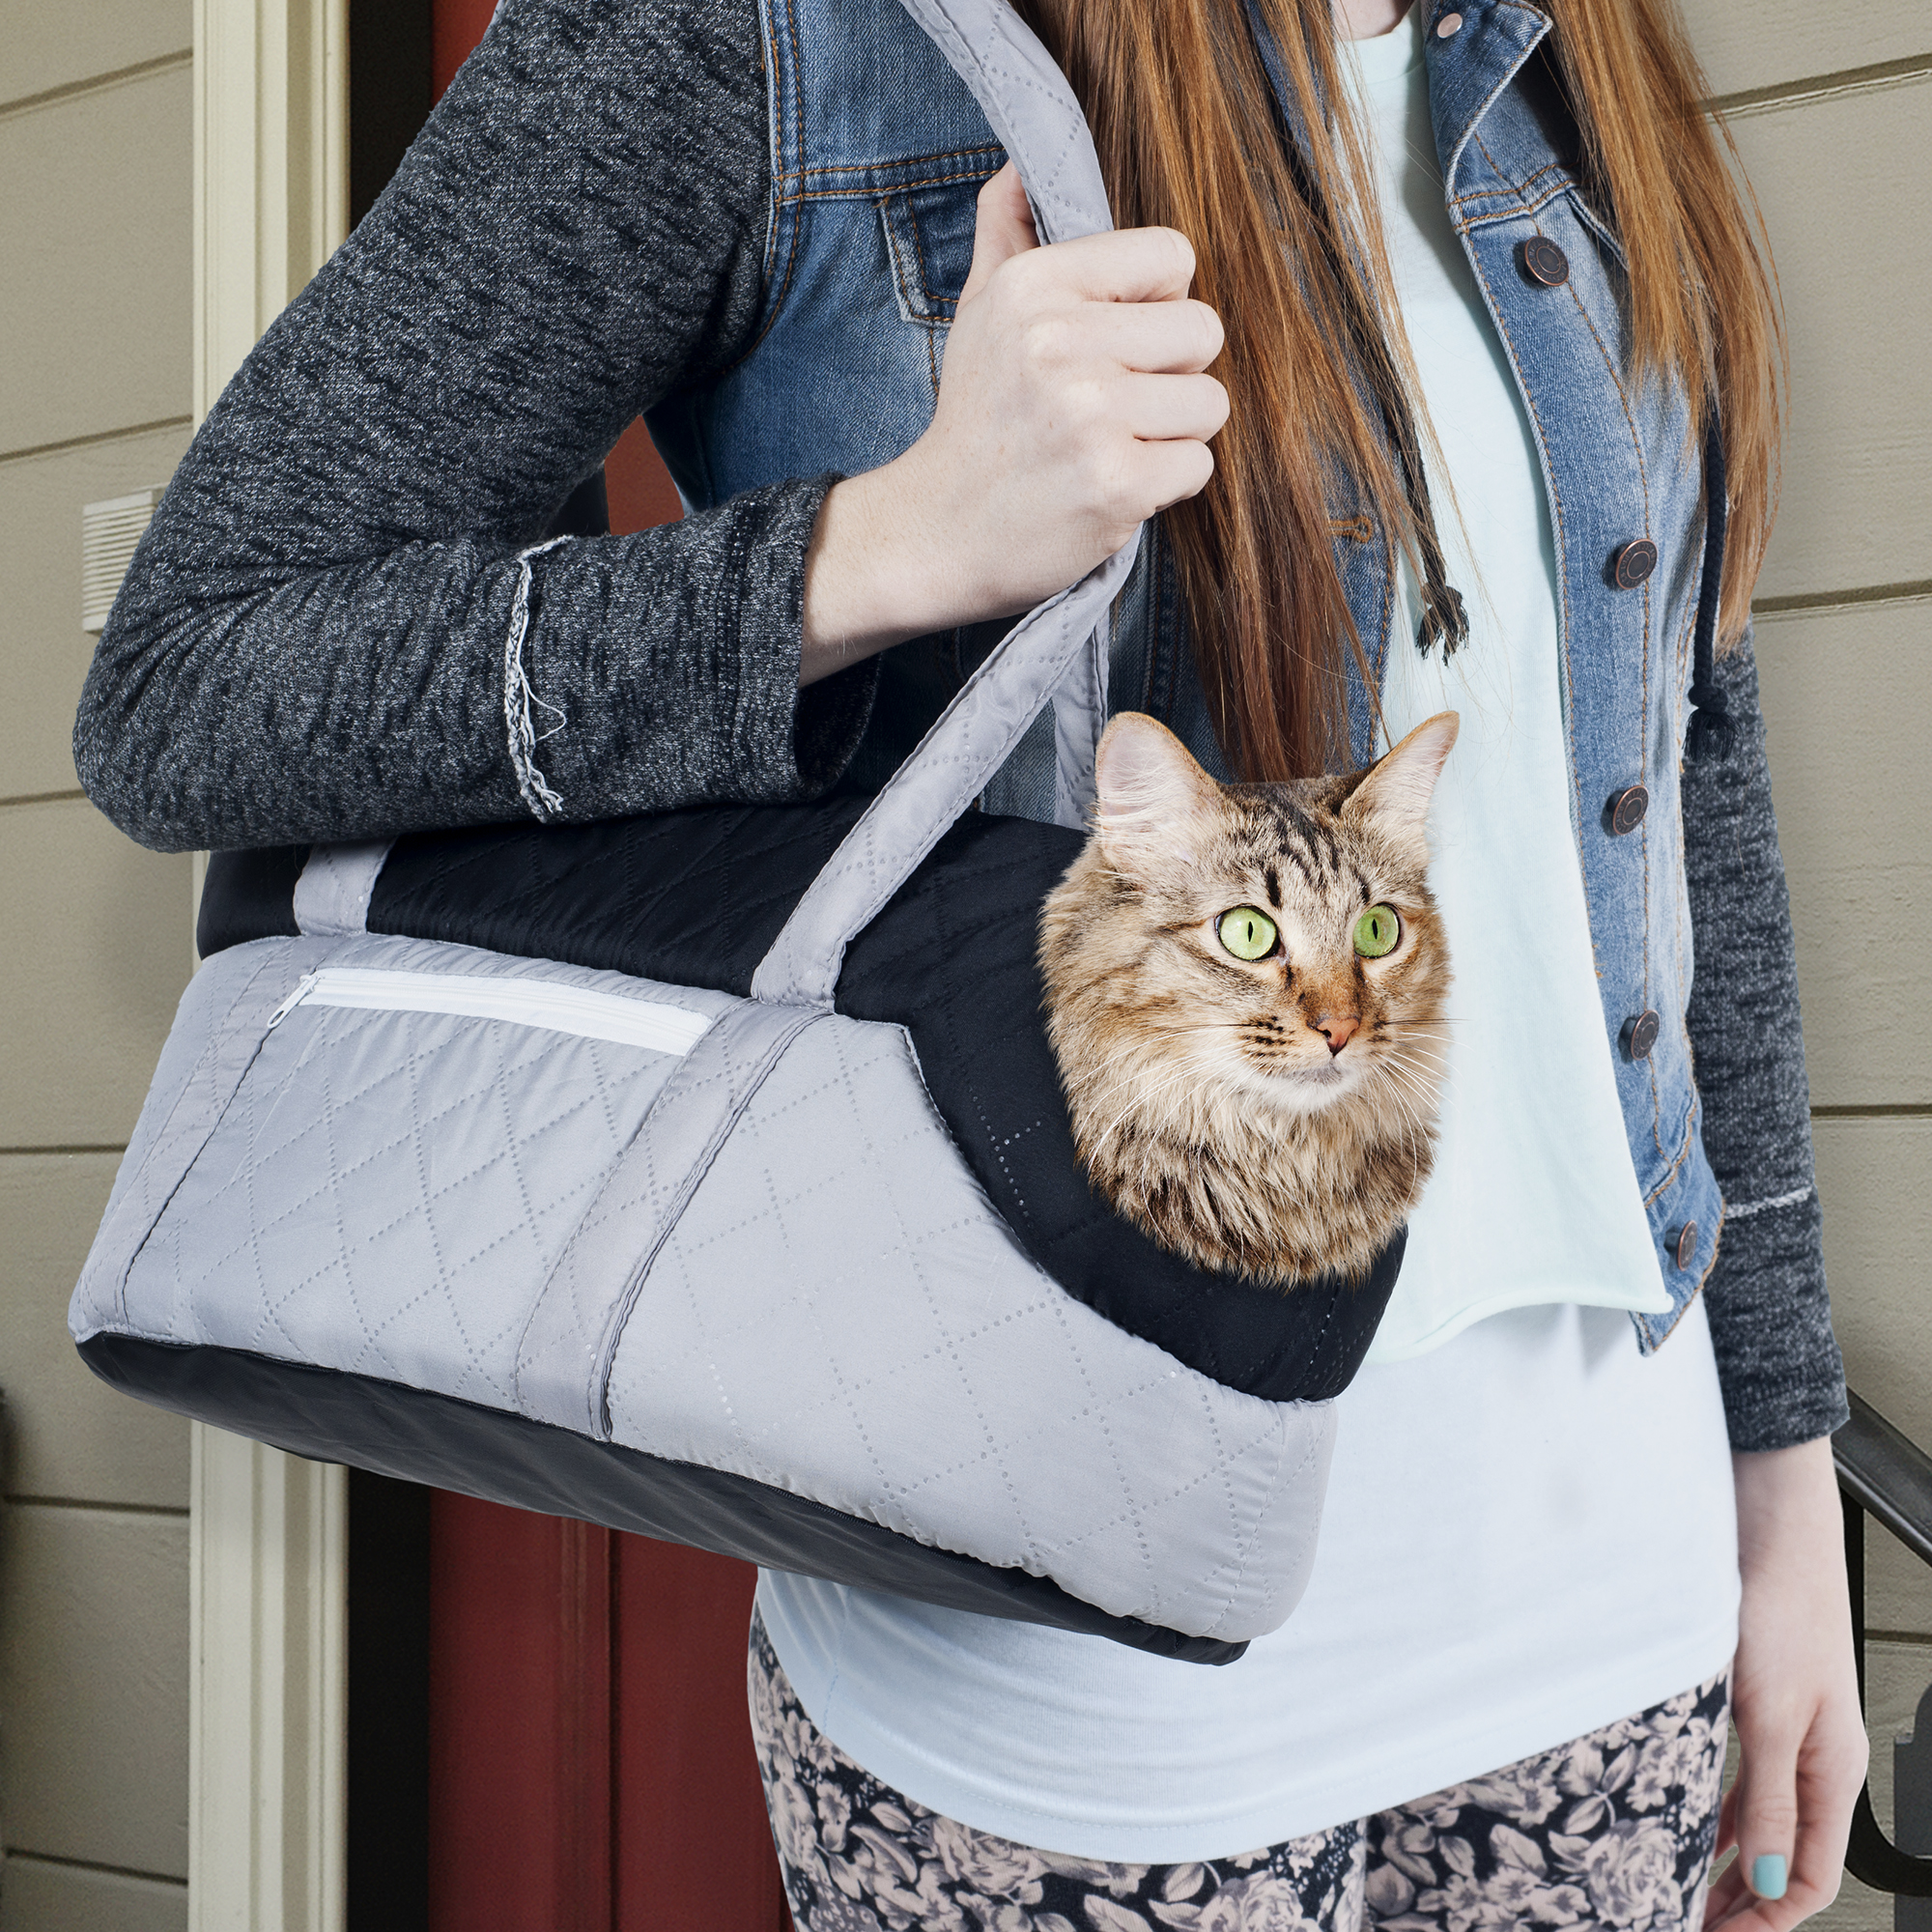 6 Best Cat Carriers That Will Help Keep Your Cat Calm [Dec. 2020]